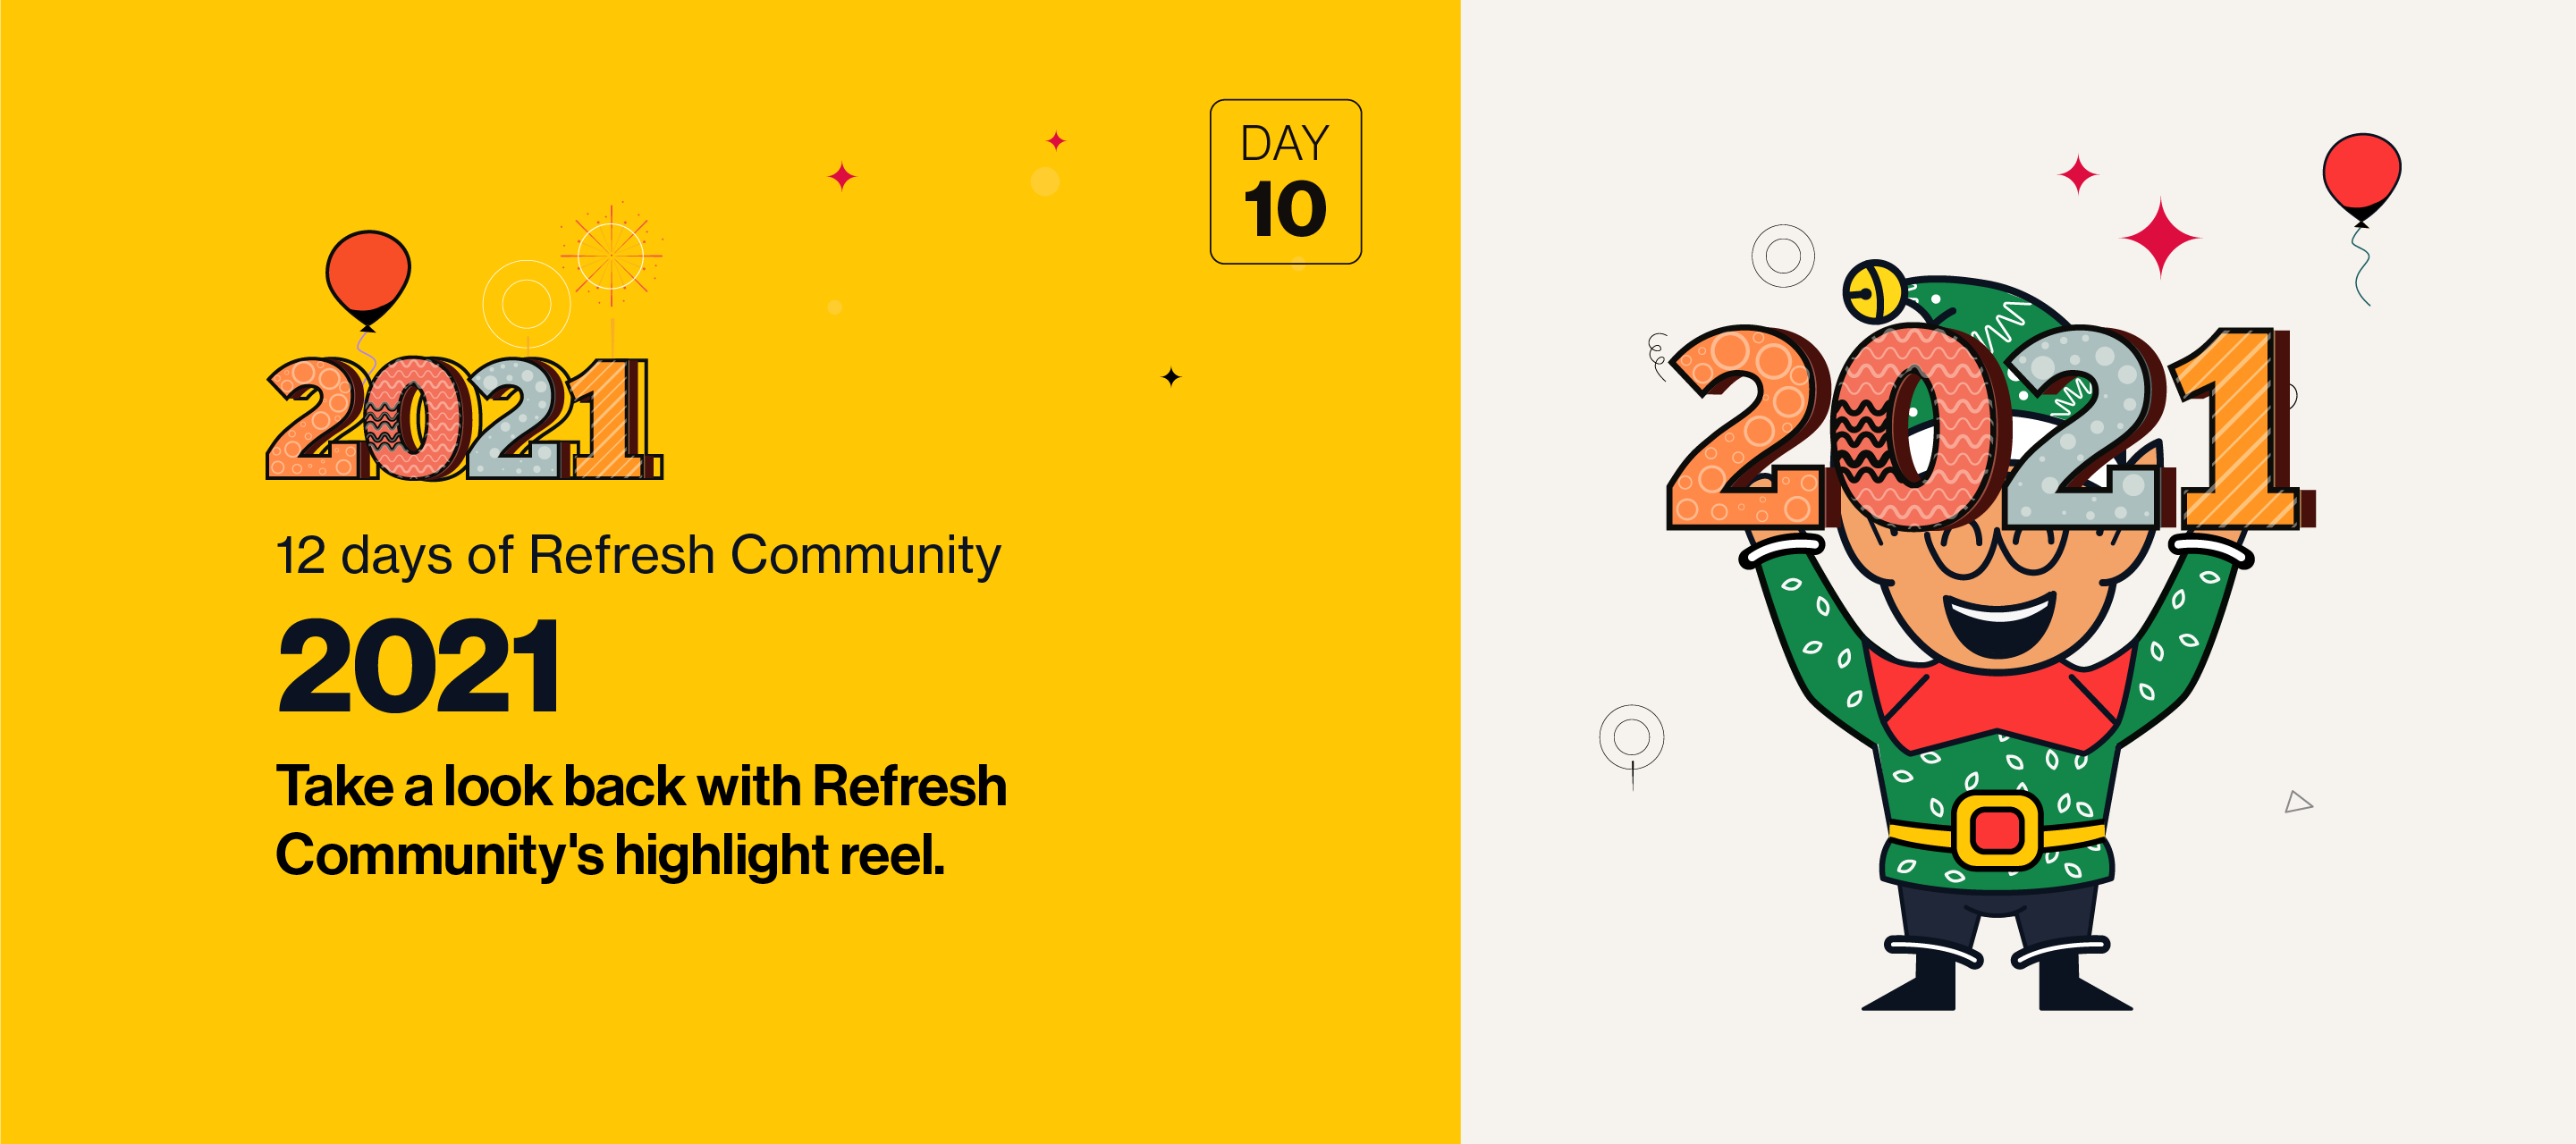 Day 10: The 2021 Community highlight reel | Take a look!